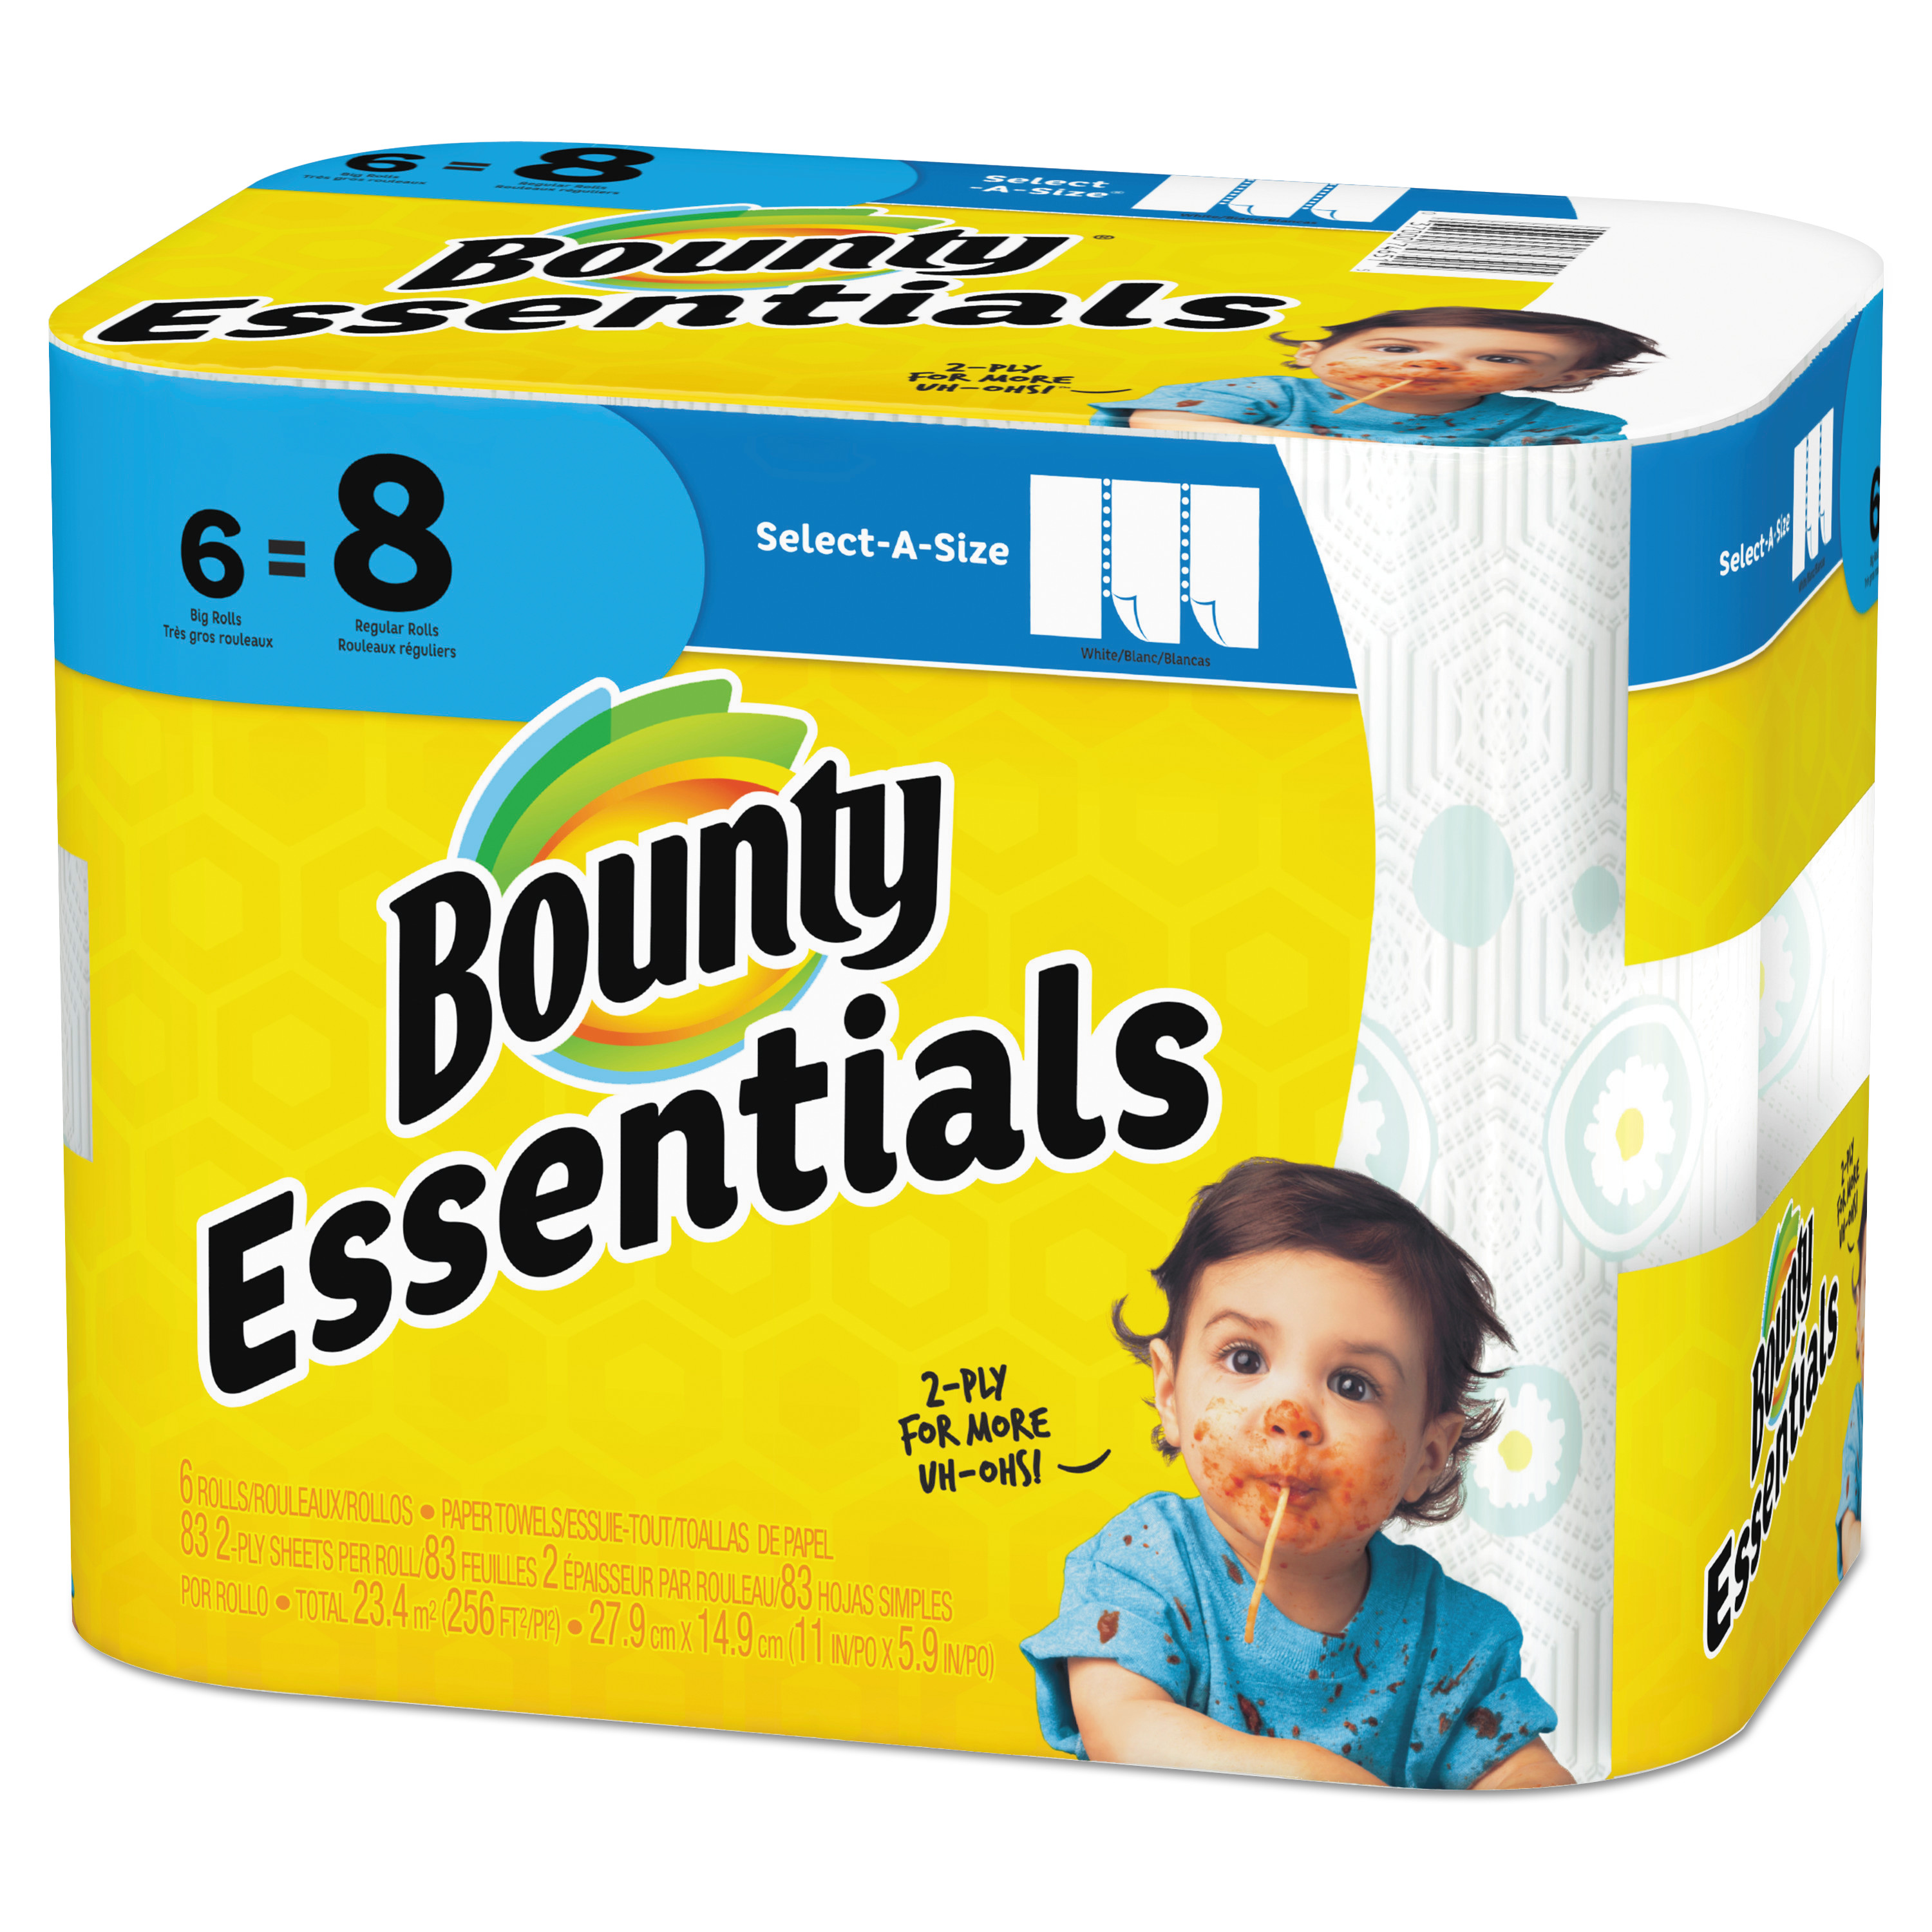  Bounty 74651 Essentials Select-A-Size Paper Towels, 2-Ply, 83 Sheets/Roll, 6 Rolls/Carton (PGC74651) 